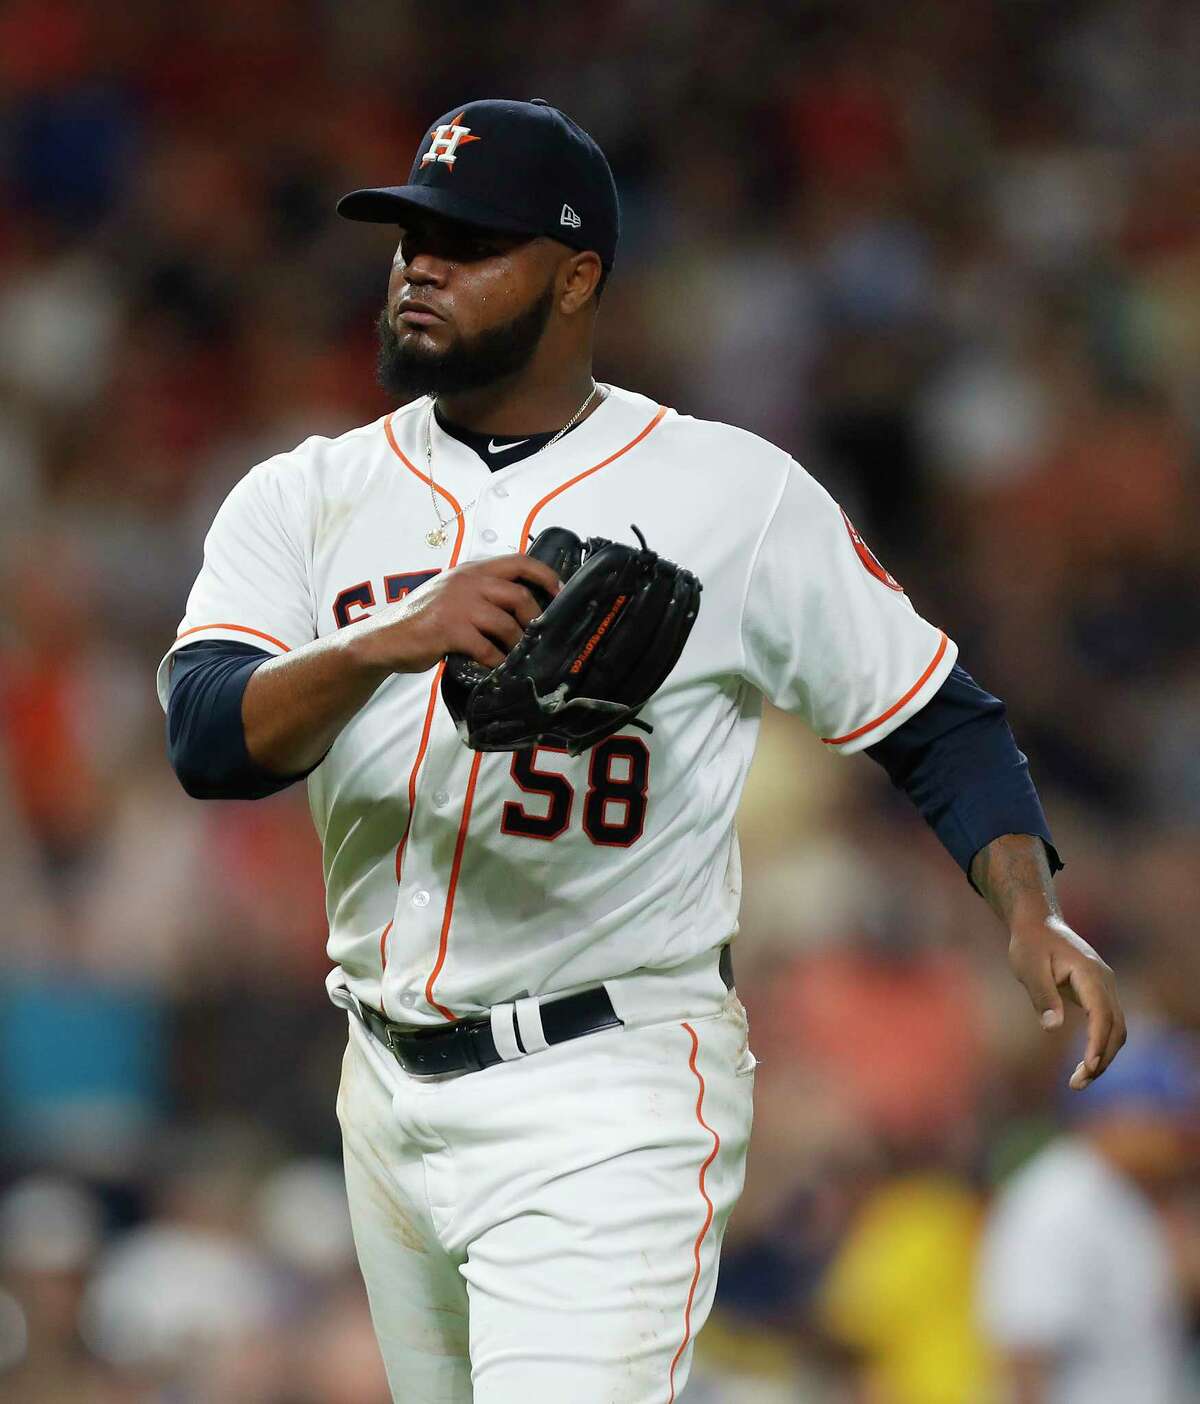 Francis Martes likes to emulate idol Johnny Cueto of the Giants, but the rookie hasn't gone "full Cueto" while with the Astros in the majors like he did in the minors.